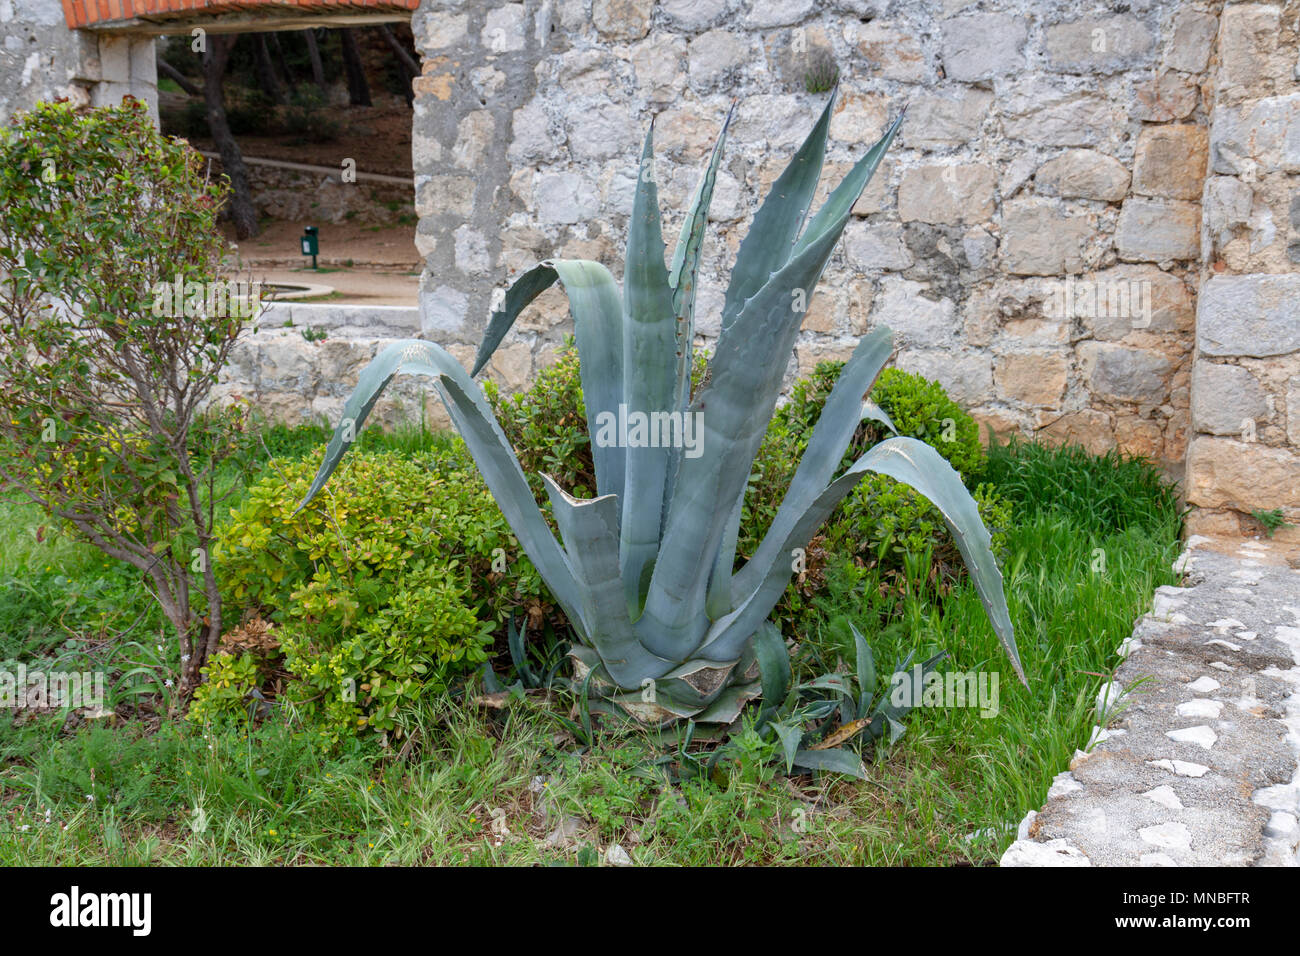 An agave salmiana cactus plant in the Old City of Dubrovnik, Croatia. Stock Photo